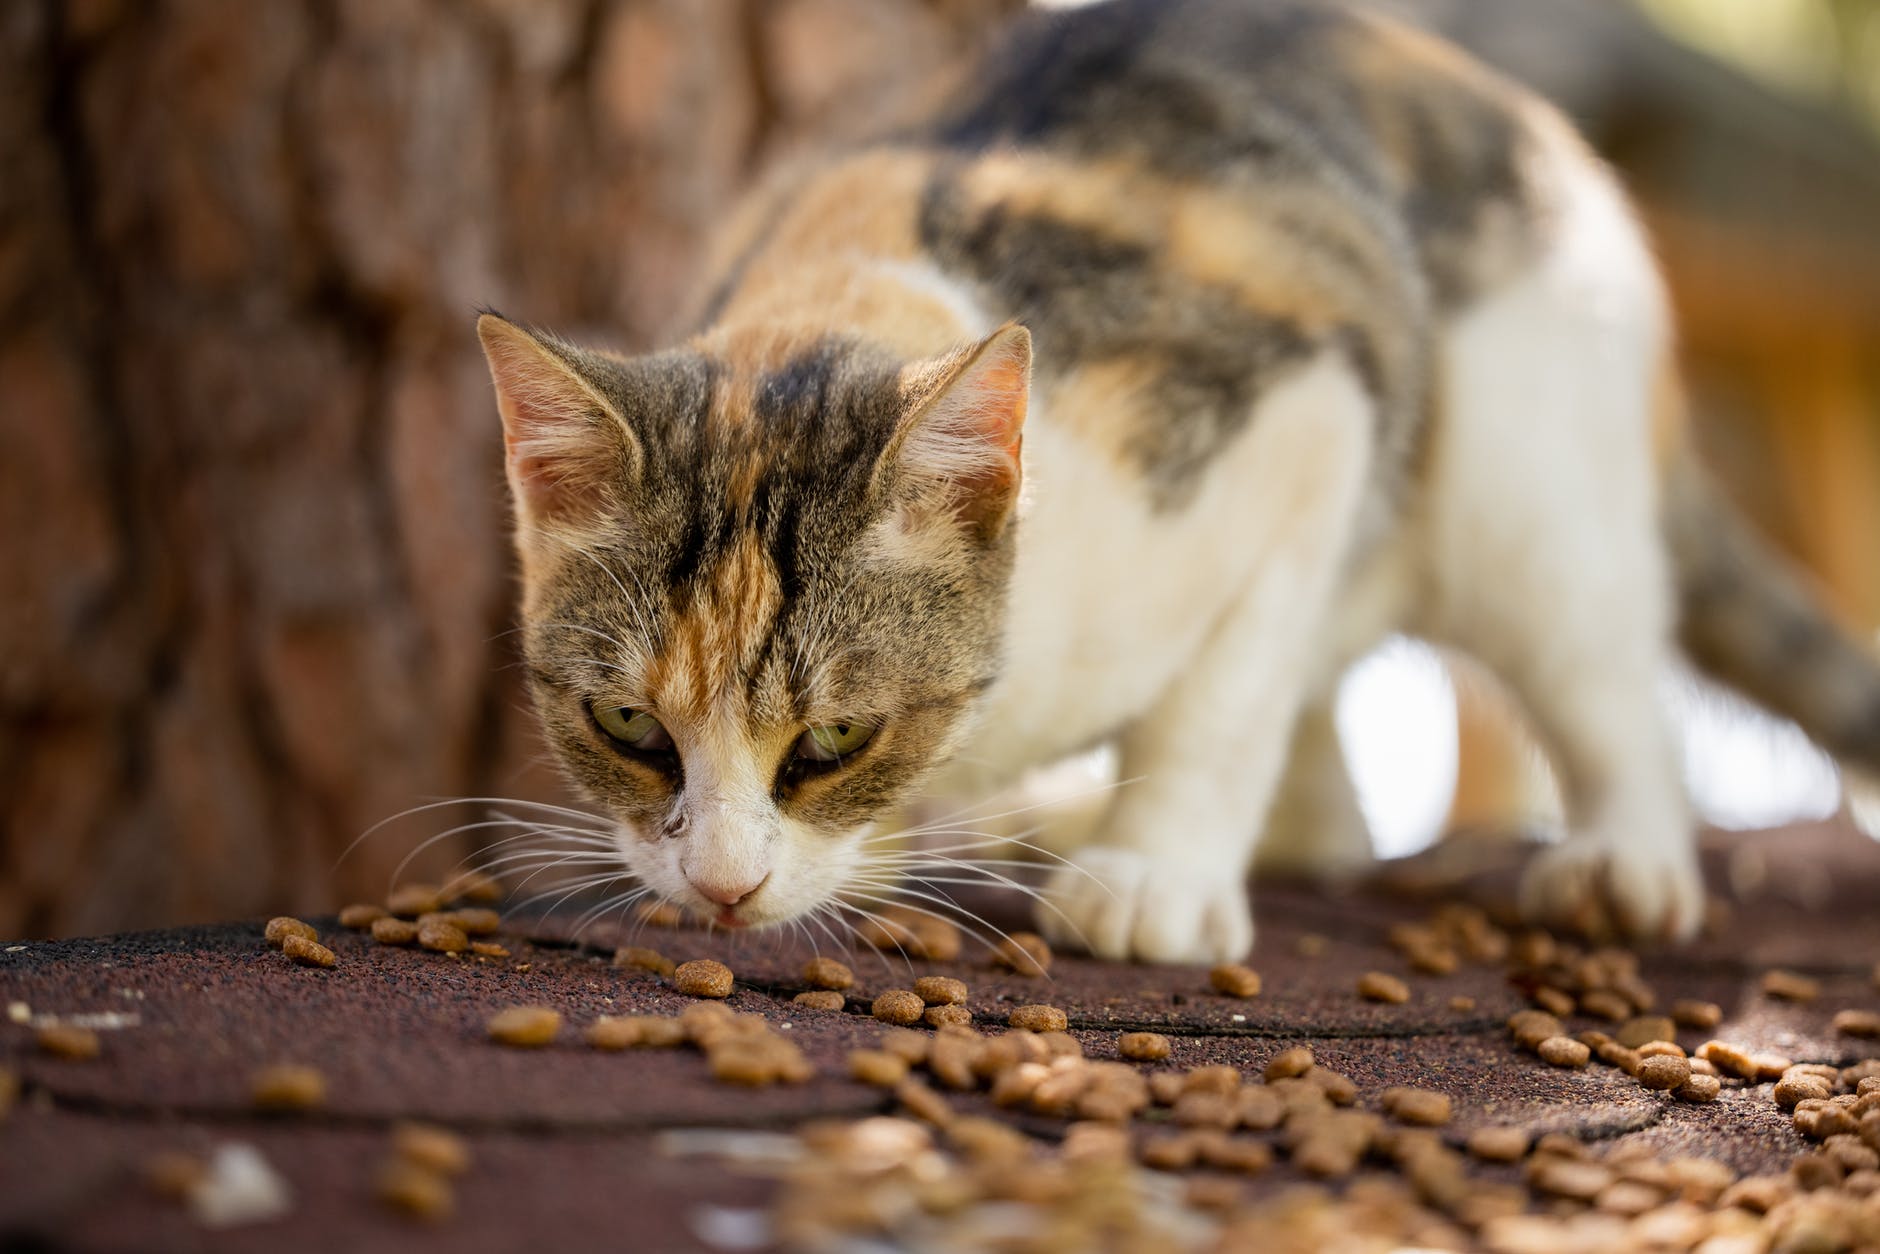 What to do if my cat ate too many graham crackers?